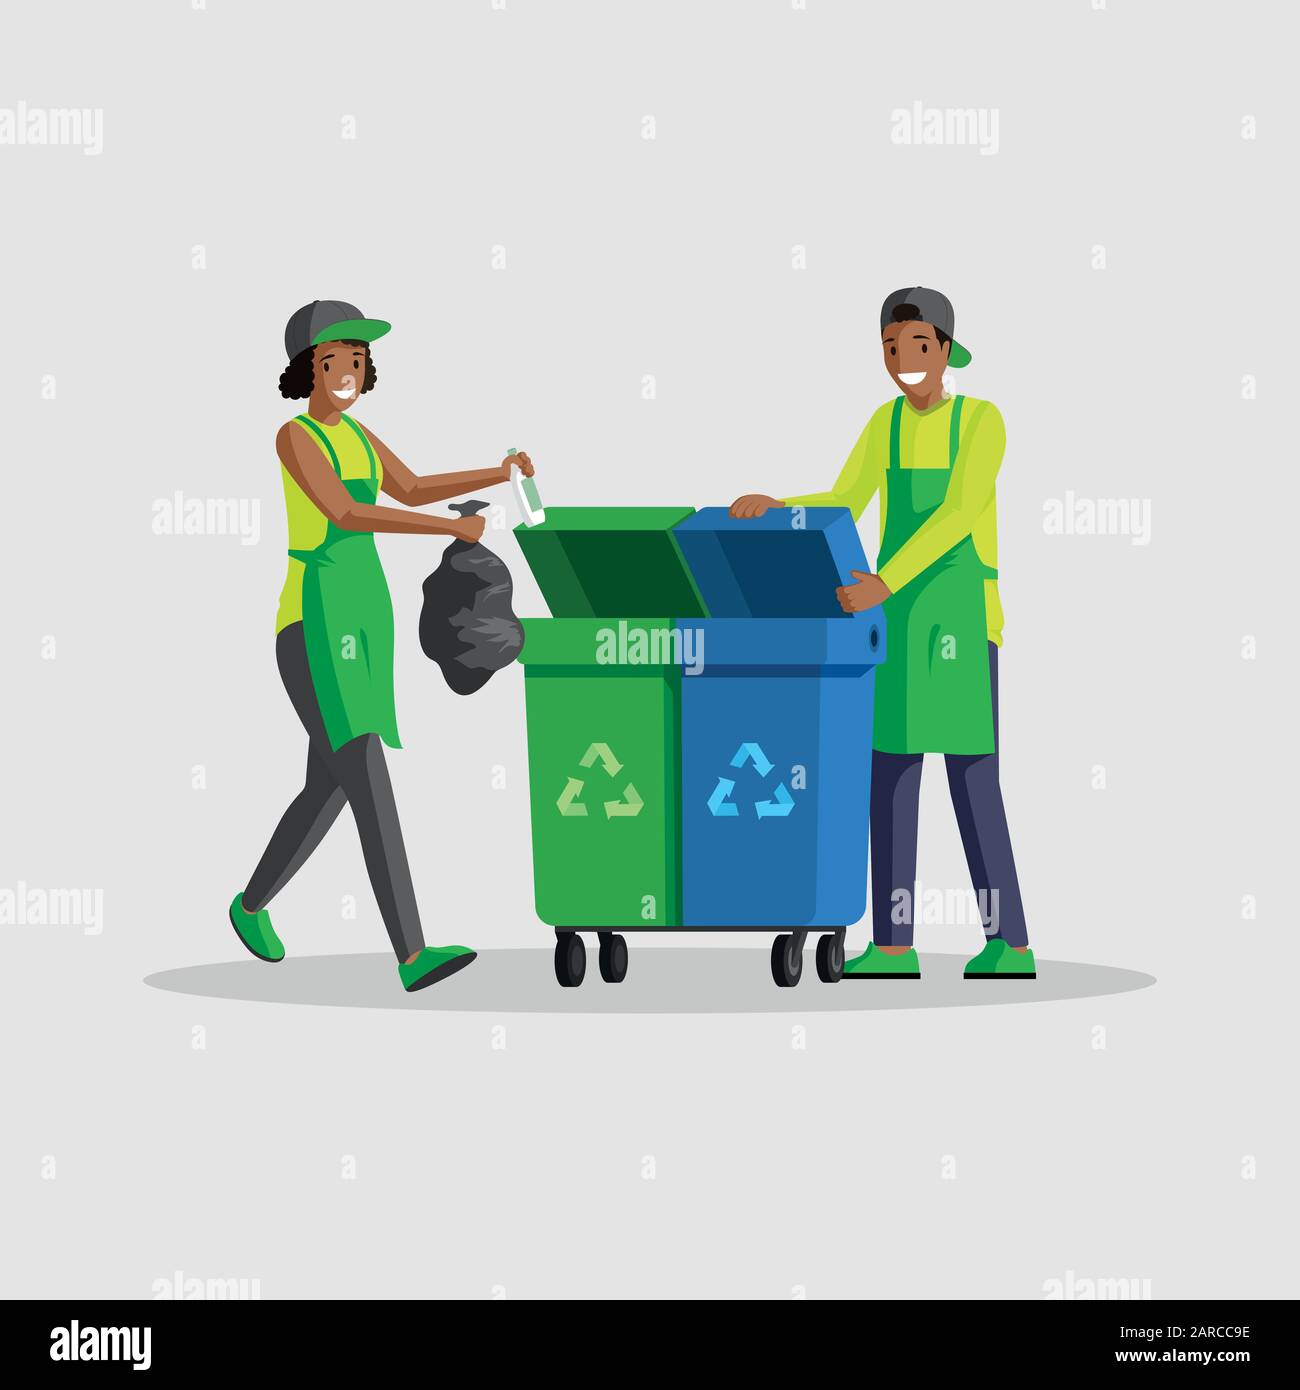 People taking out rubbish flat vector illustration. Volunteers sorting waste, putting garbage bag in dustbins for recycling. African american man and woman cleaning isolated cartoon characters Stock Vector